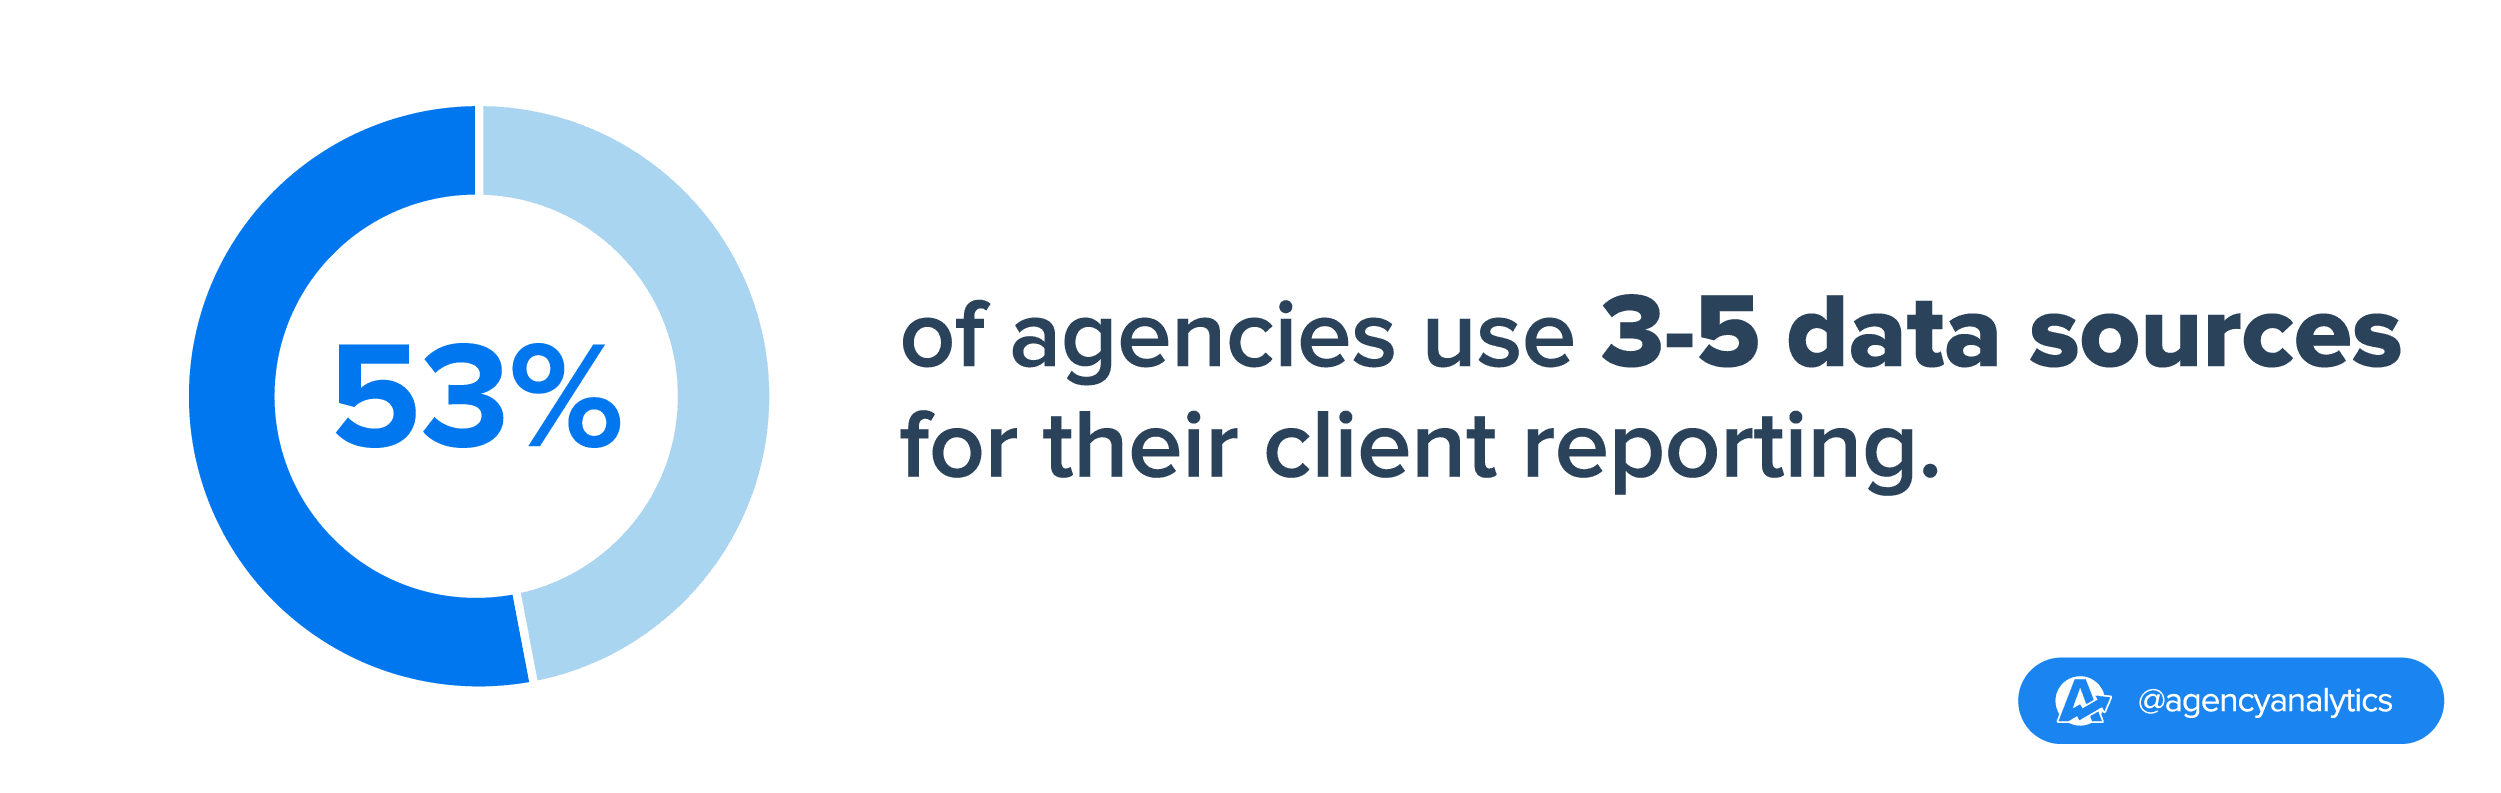 stat of the avg number of data sources used by agencies for client reporting